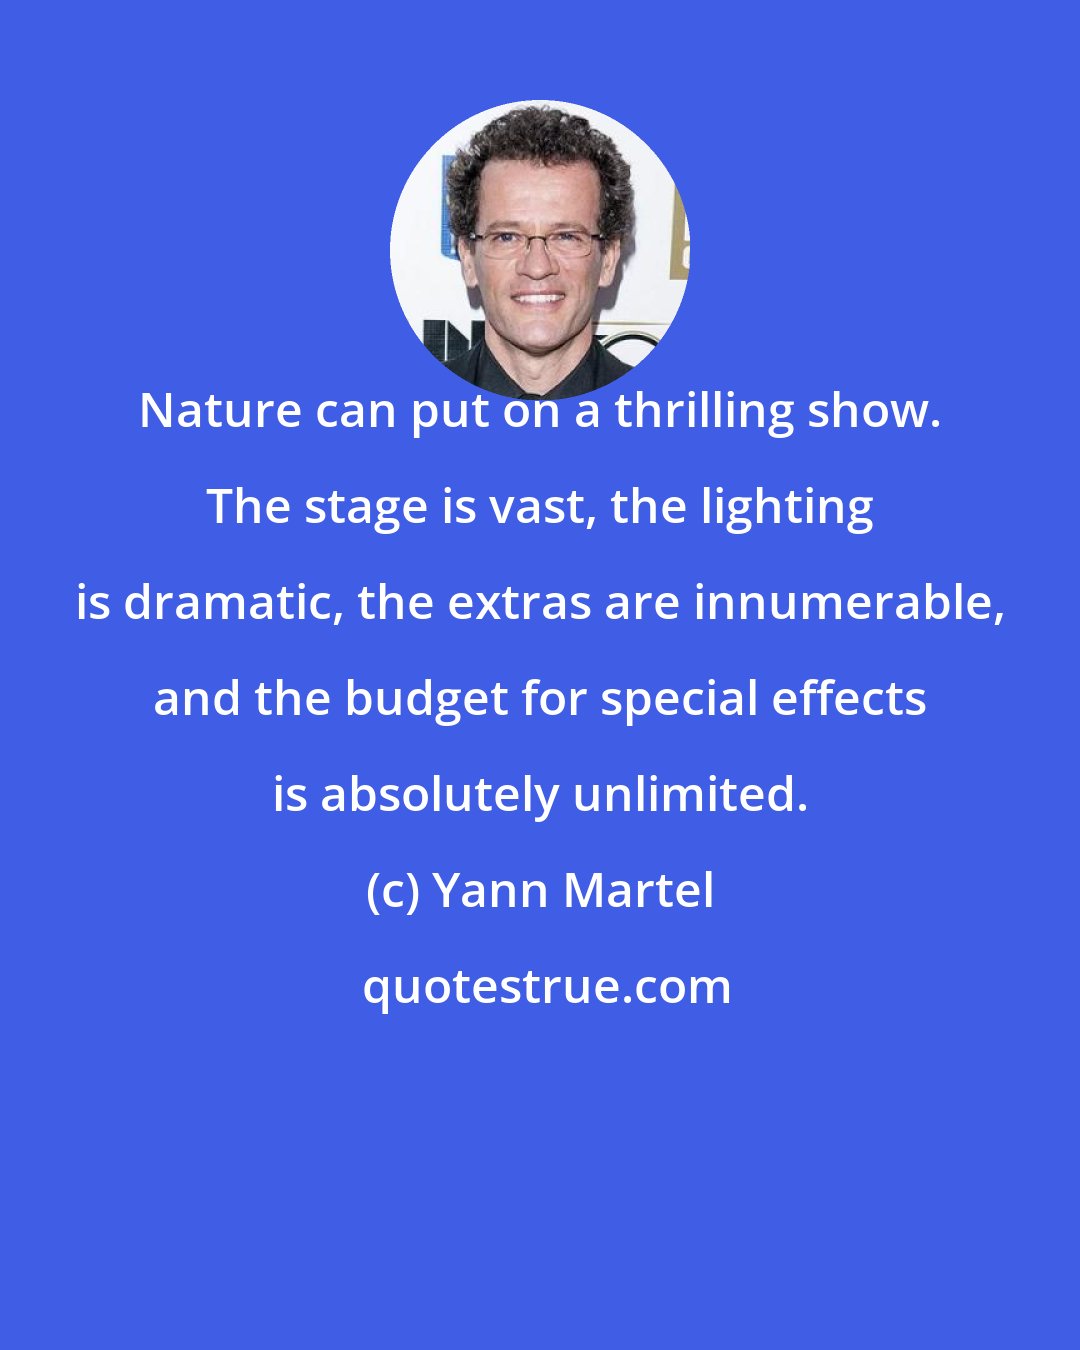 Yann Martel: Nature can put on a thrilling show. The stage is vast, the lighting is dramatic, the extras are innumerable, and the budget for special effects is absolutely unlimited.